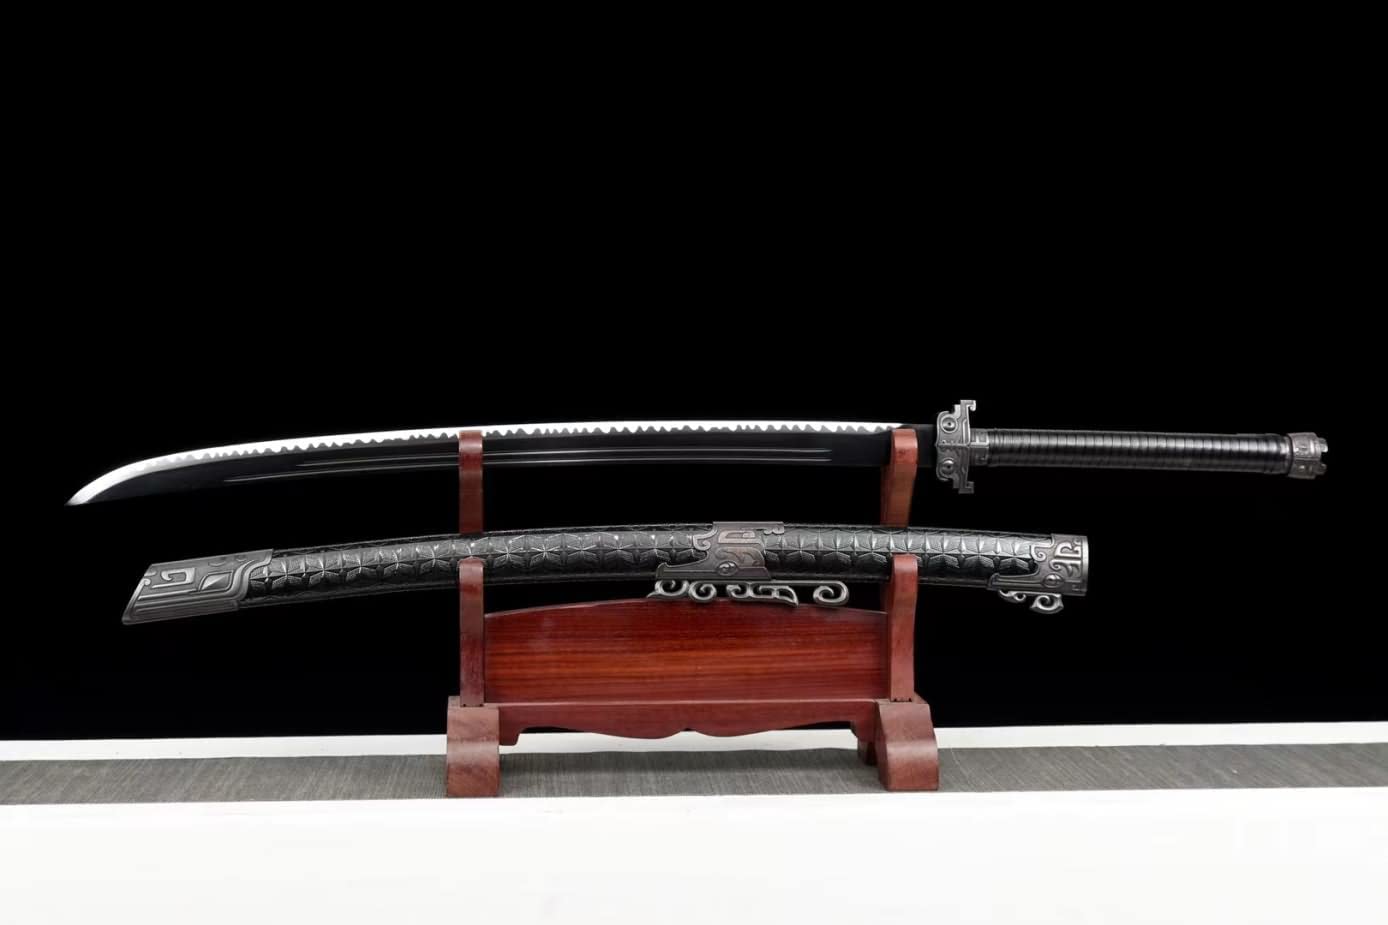 Black Gold Machete,Forged high Carbon Steel Blades,Alloy Fittings,chinese sword,loongsword